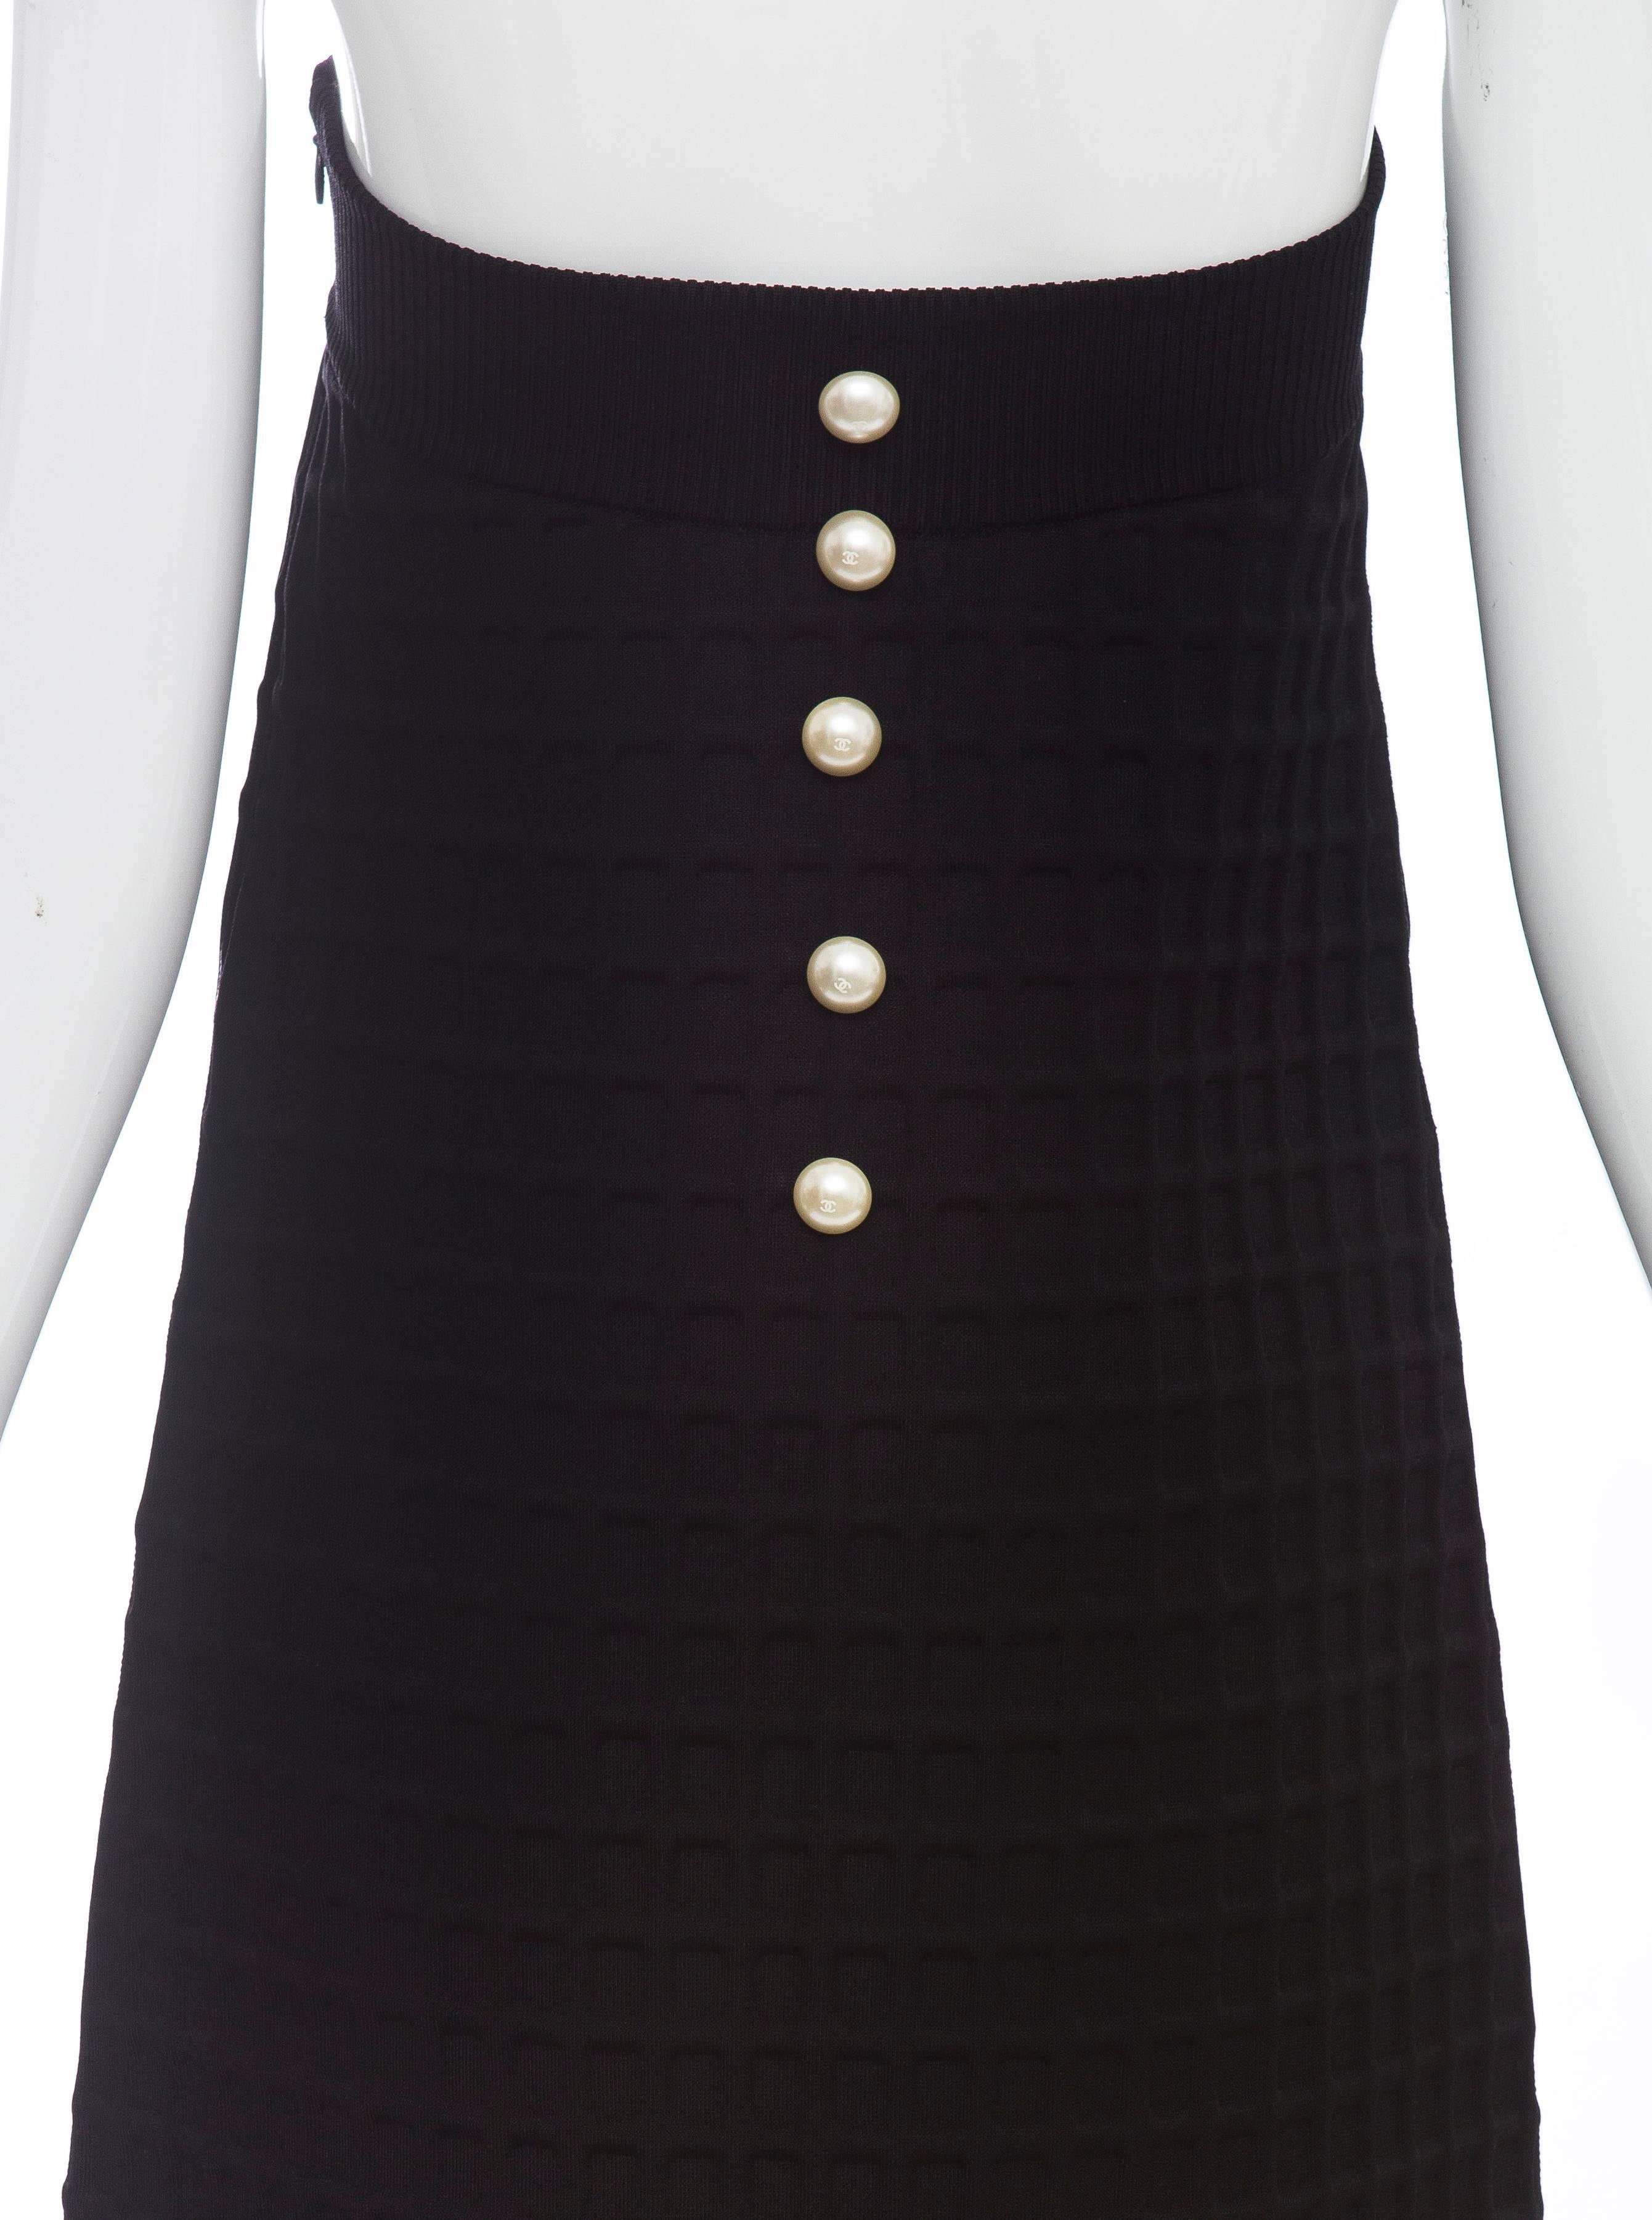 Chanel Runway Black Strapless Waffle Weave Pearl Button Back Dress, Spring 2013 For Sale 2